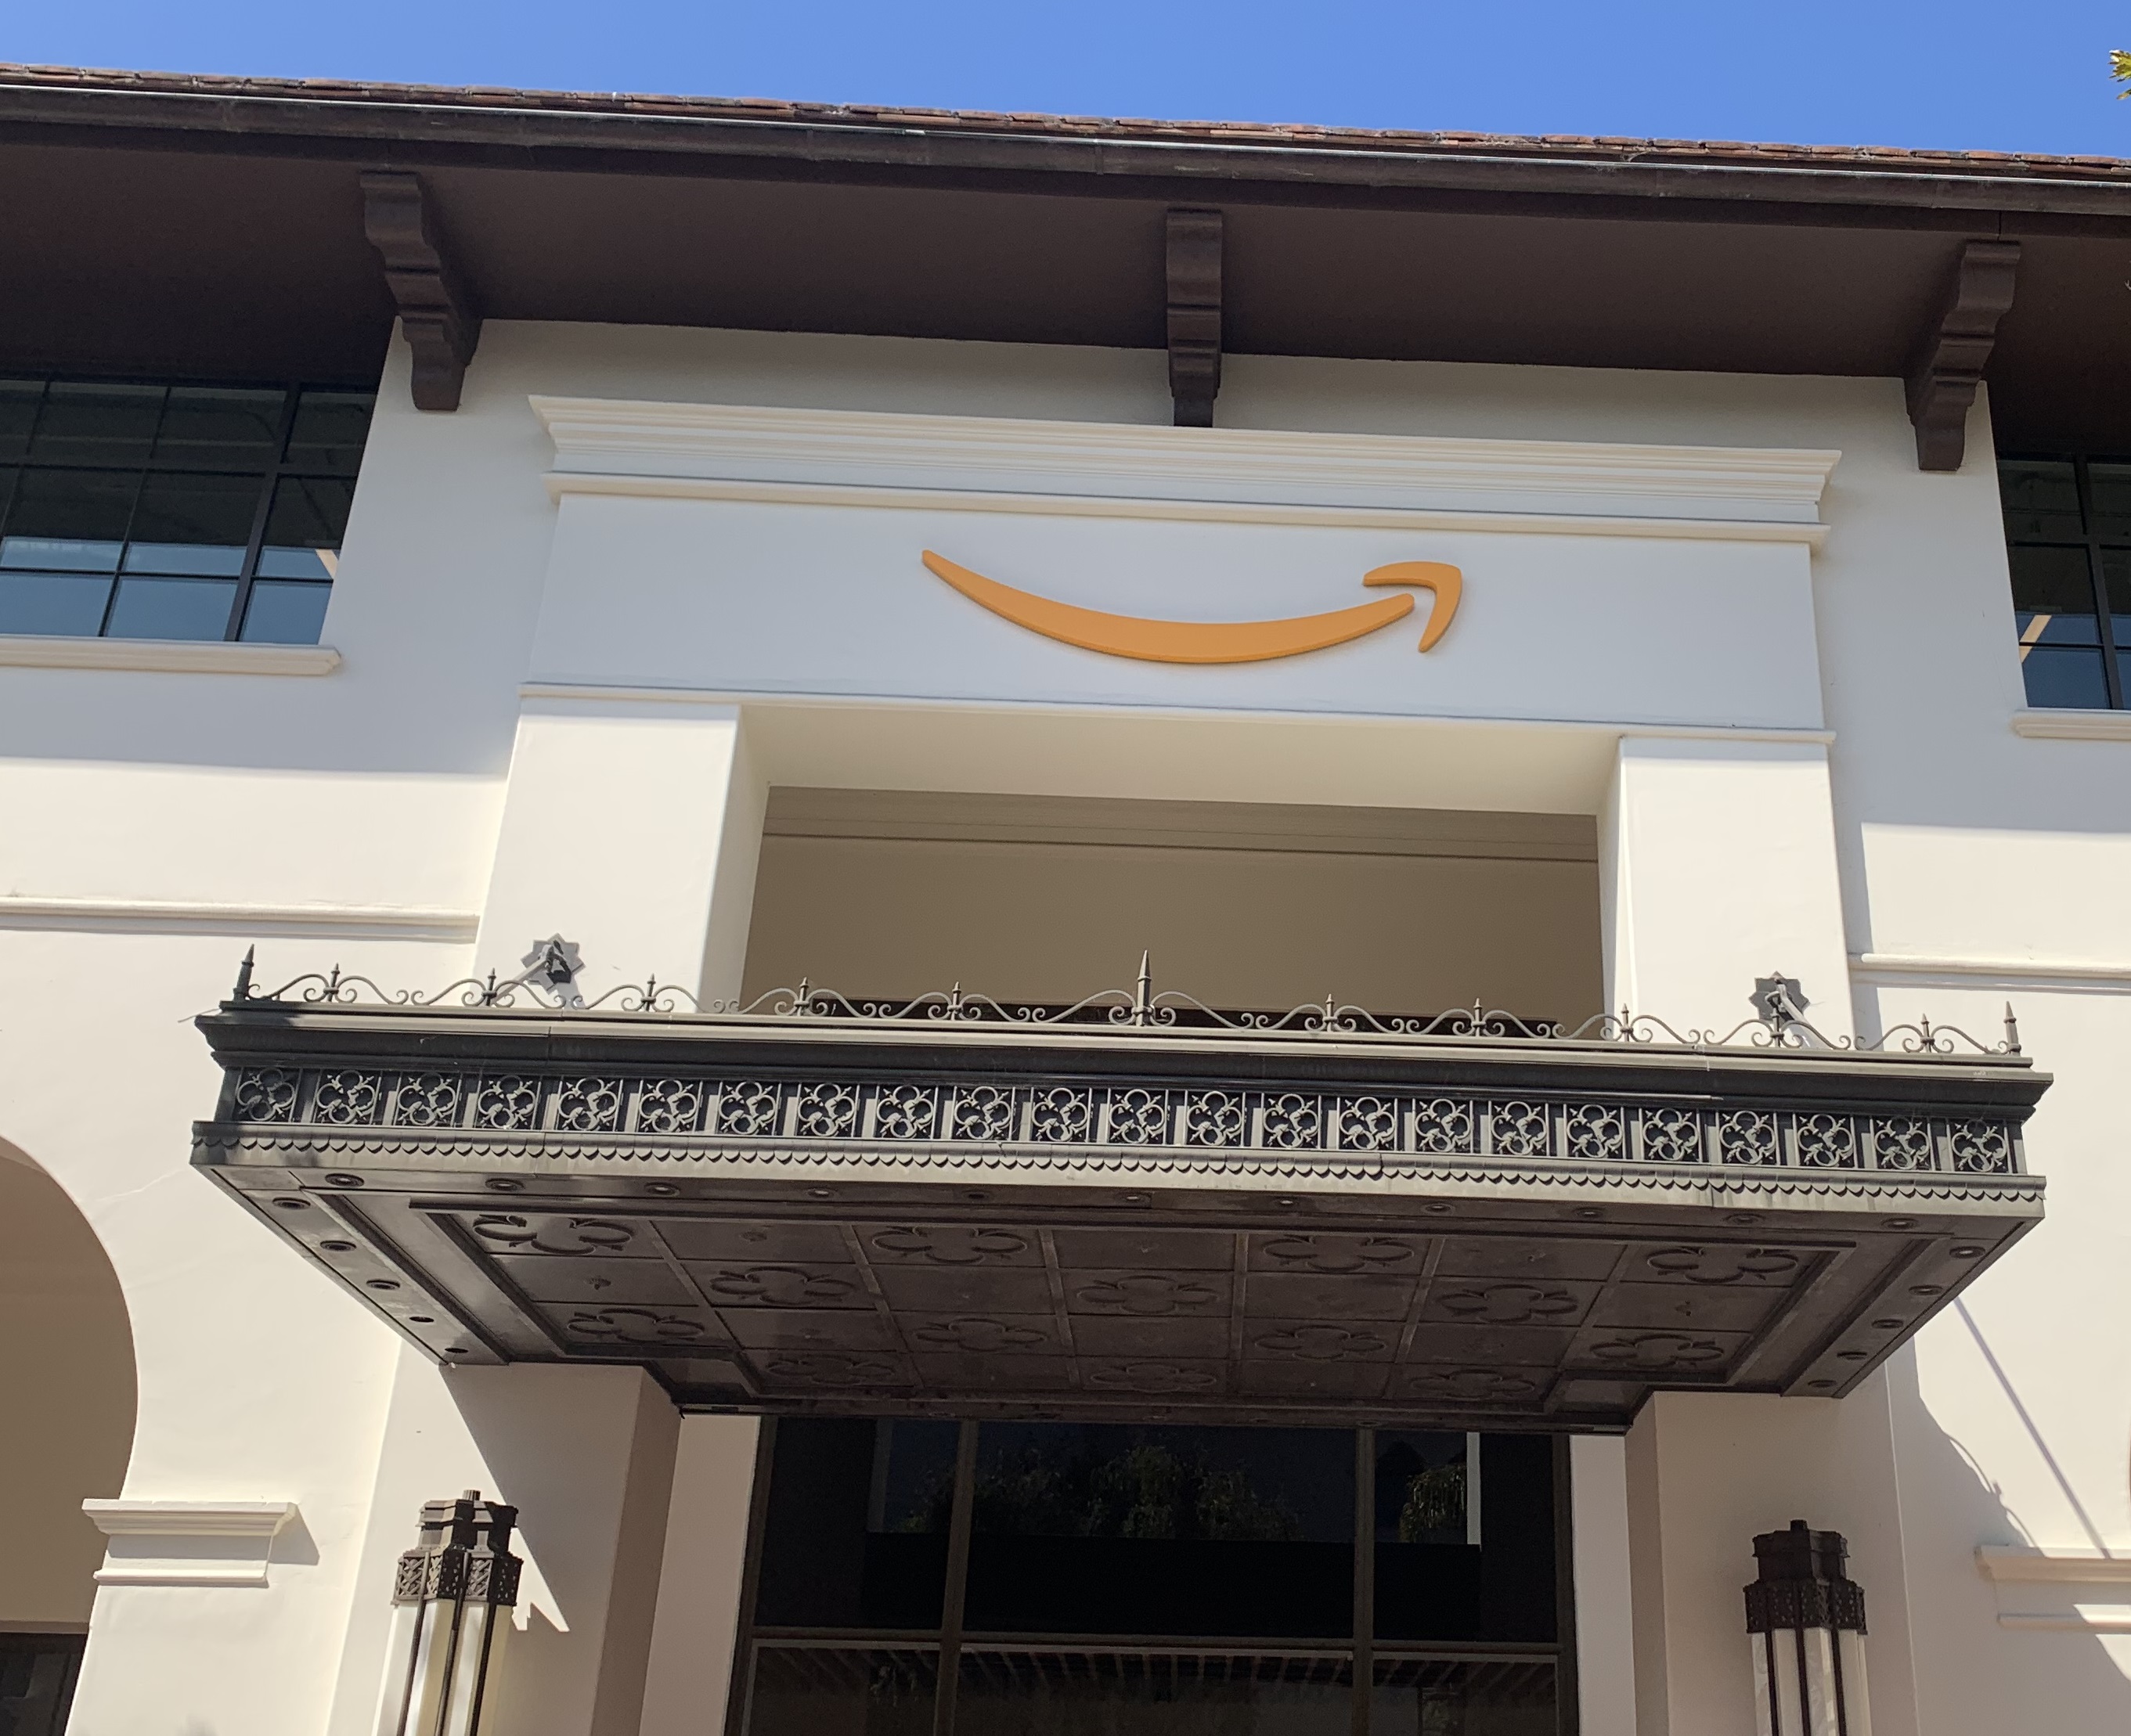 Want to go all out to impress customers? A channel letters sign package is just the thing. Like this one for Amazon in Santa Barbara!